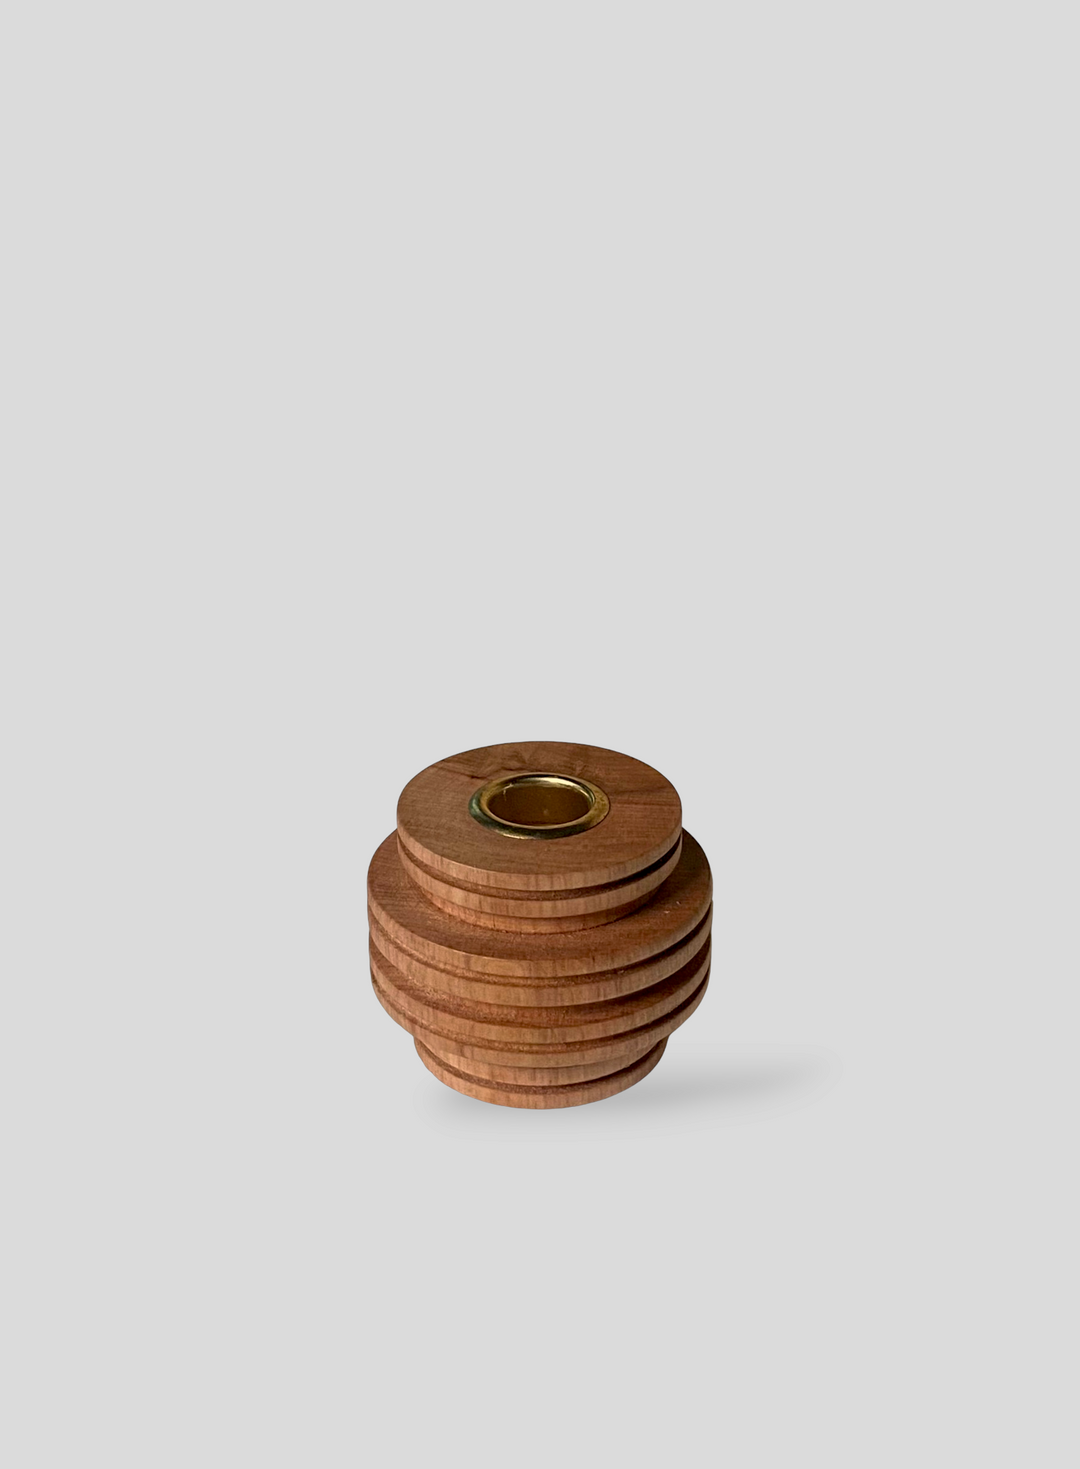 Beehive Candle Holder in Fireland Cherry Wood